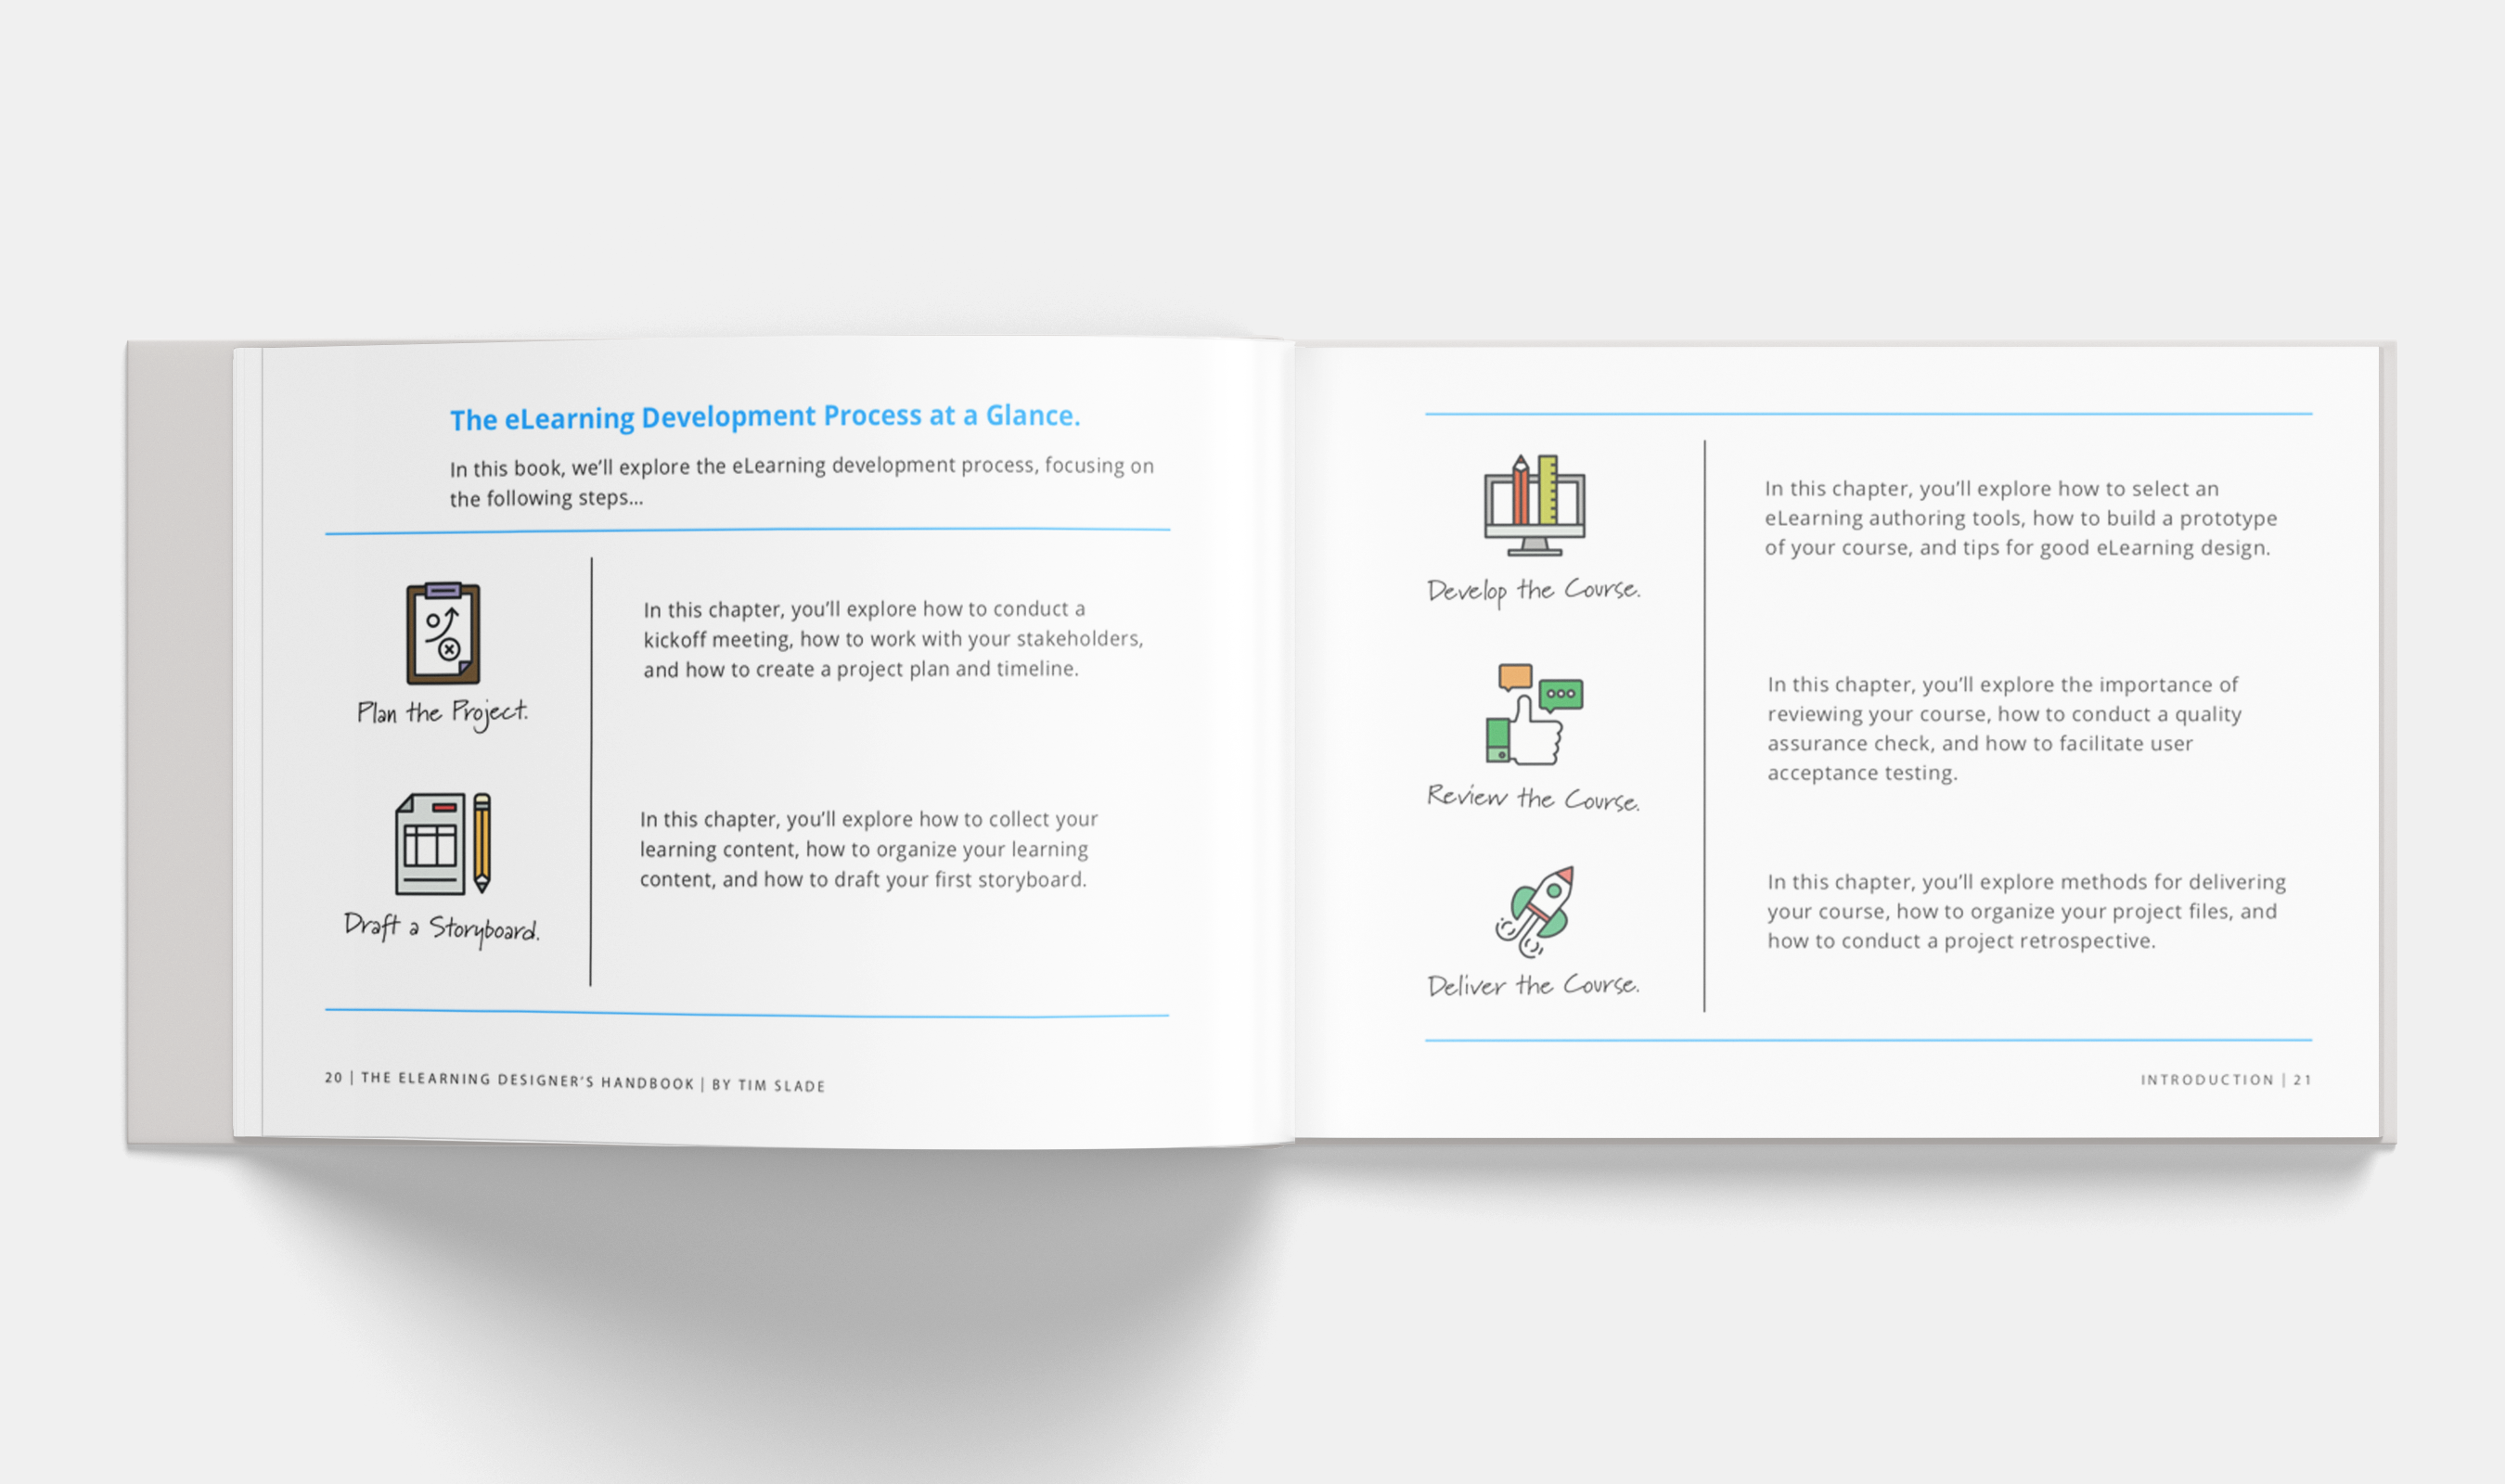 The eLearning Designers Handbook A Practical Guide to the eLearning
Development Process for New eLearning Designers Epub-Ebook